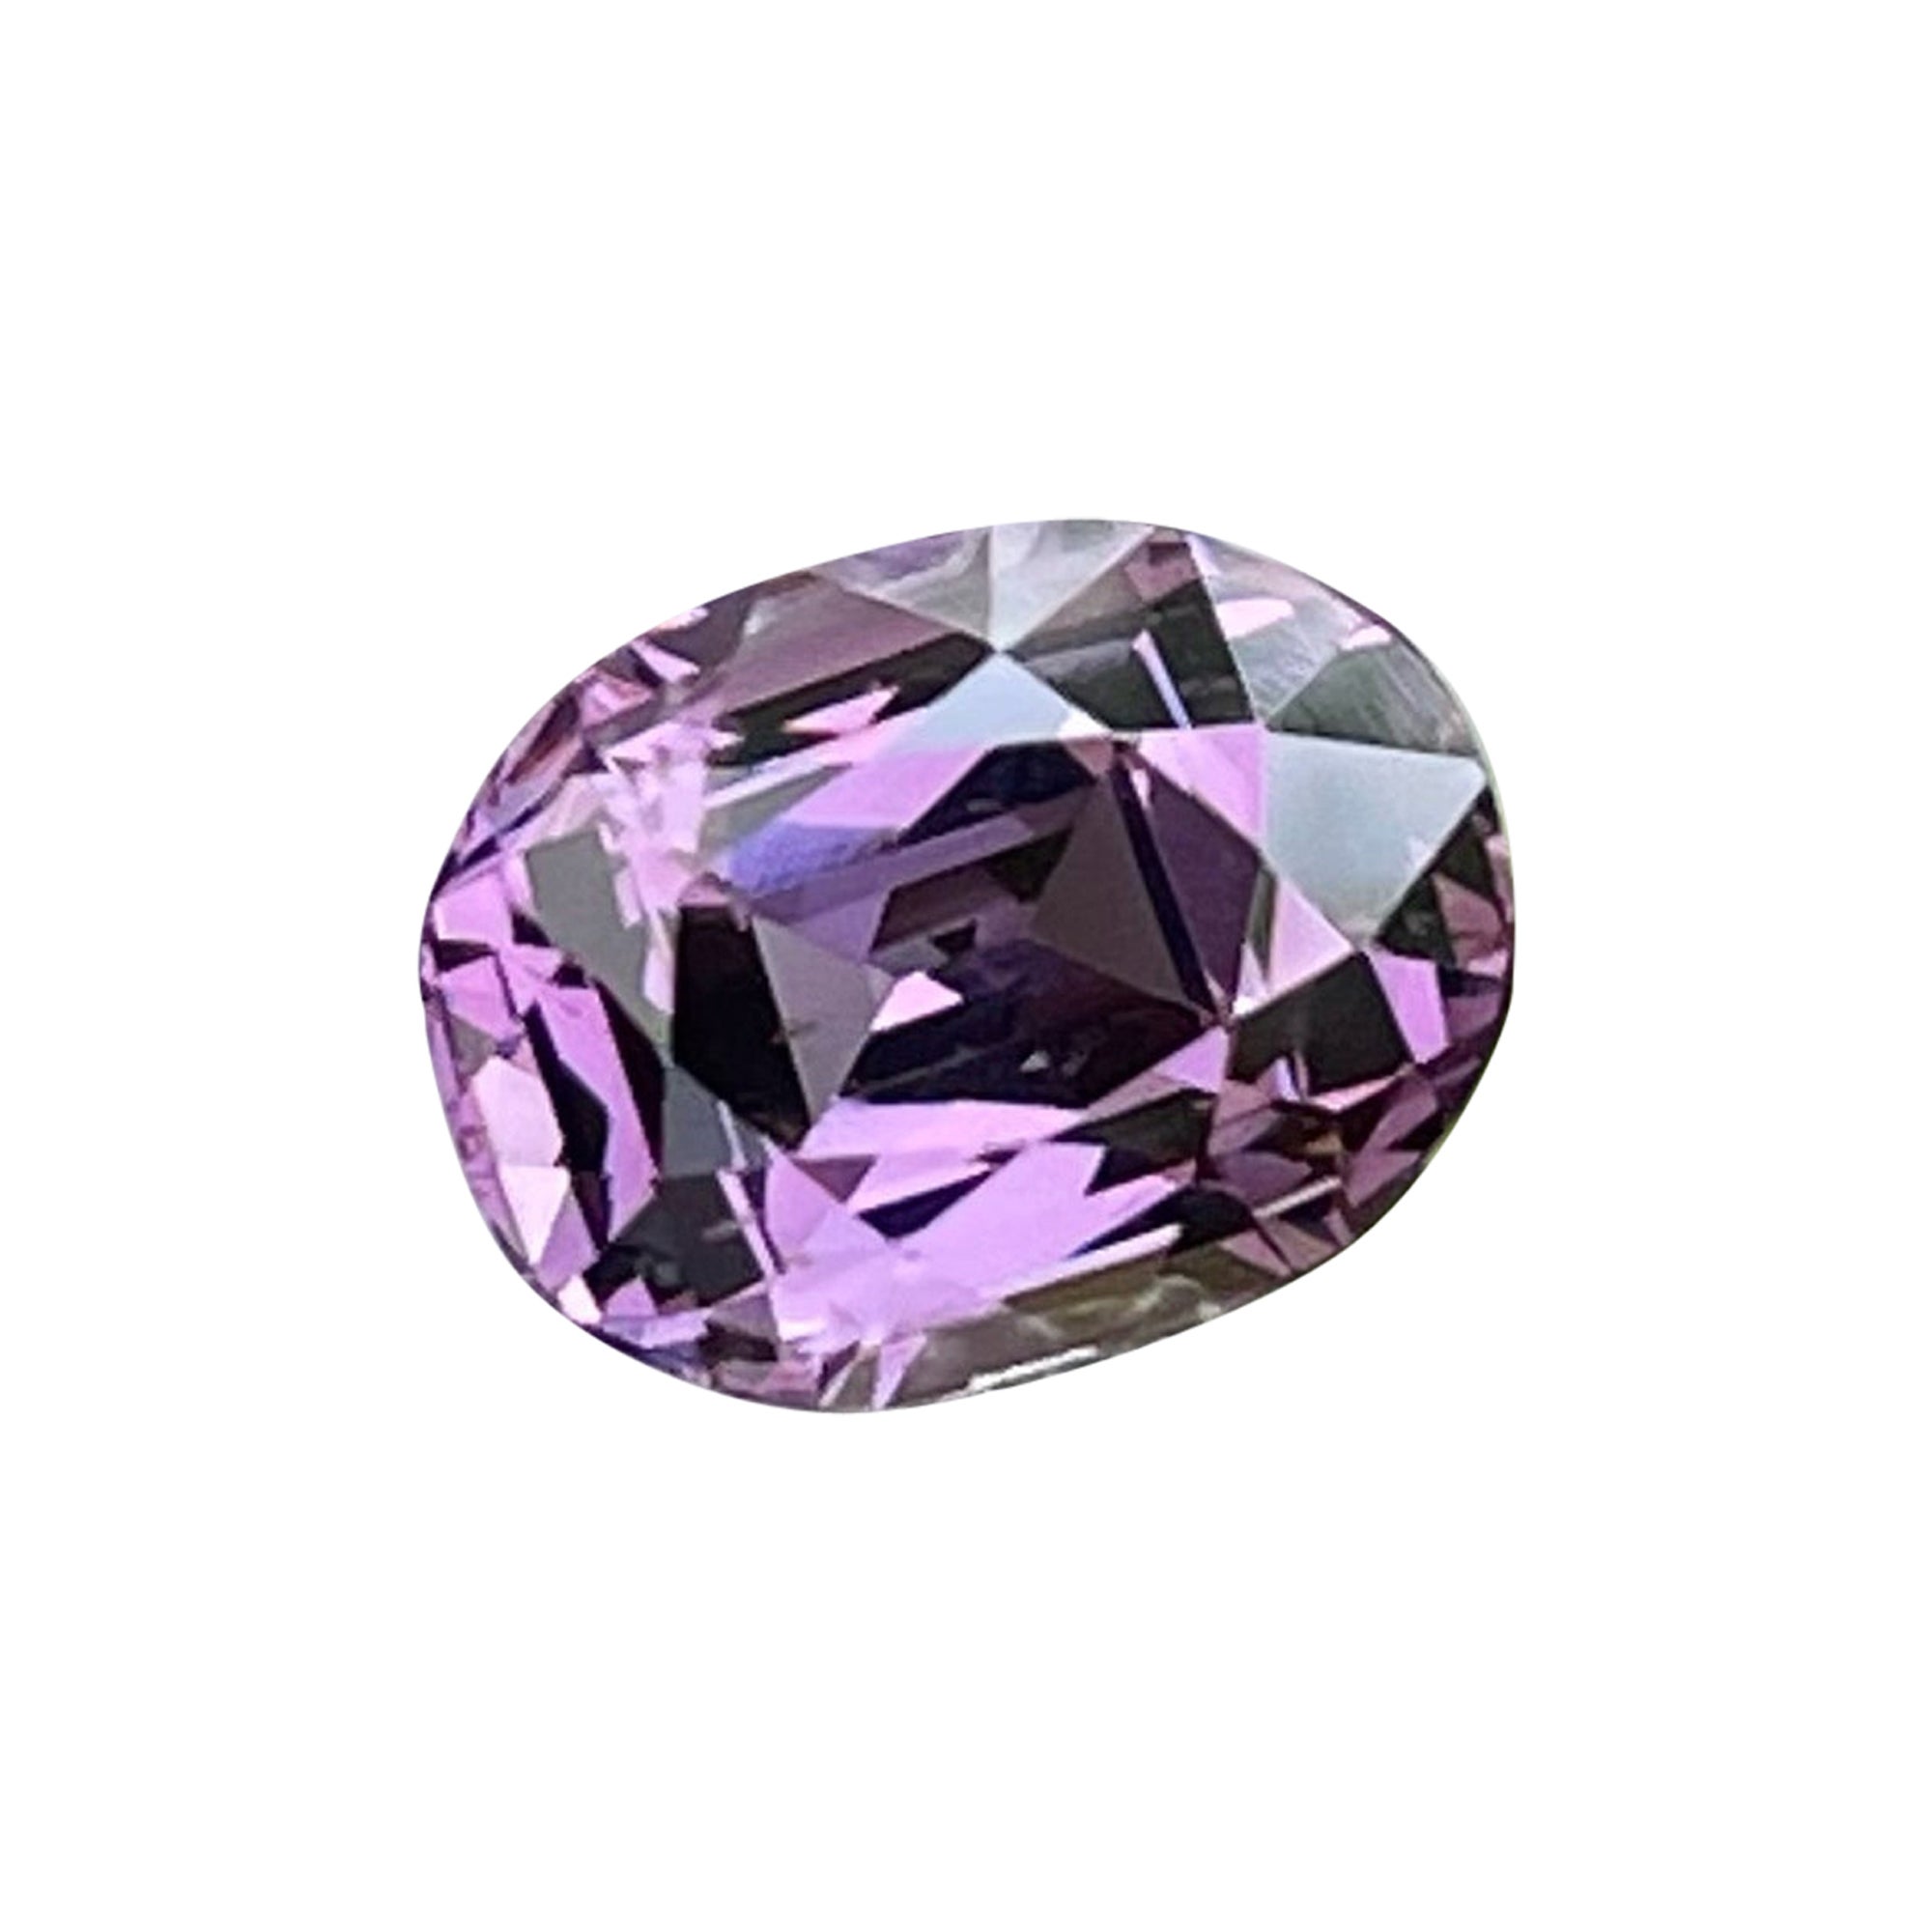 Spectacular Purple Natural Spinel Gemstone 1.82 Cts Loose Spinel for Jewelry For Sale